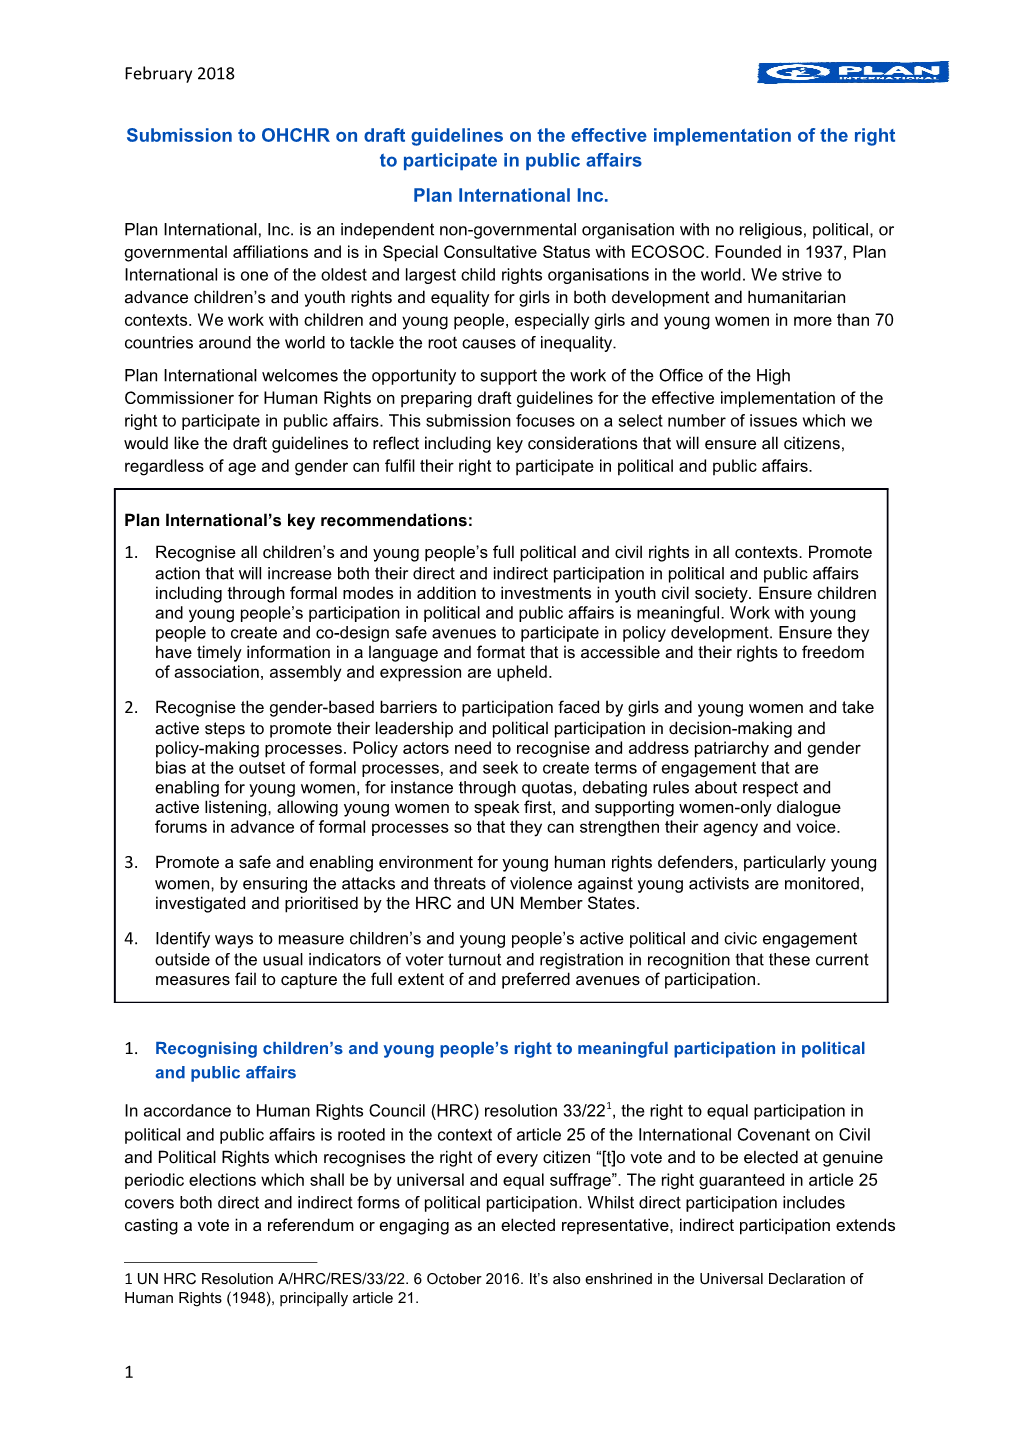 Submission to OHCHR Ondraft Guidelines on the Effective Implementation of the Right To